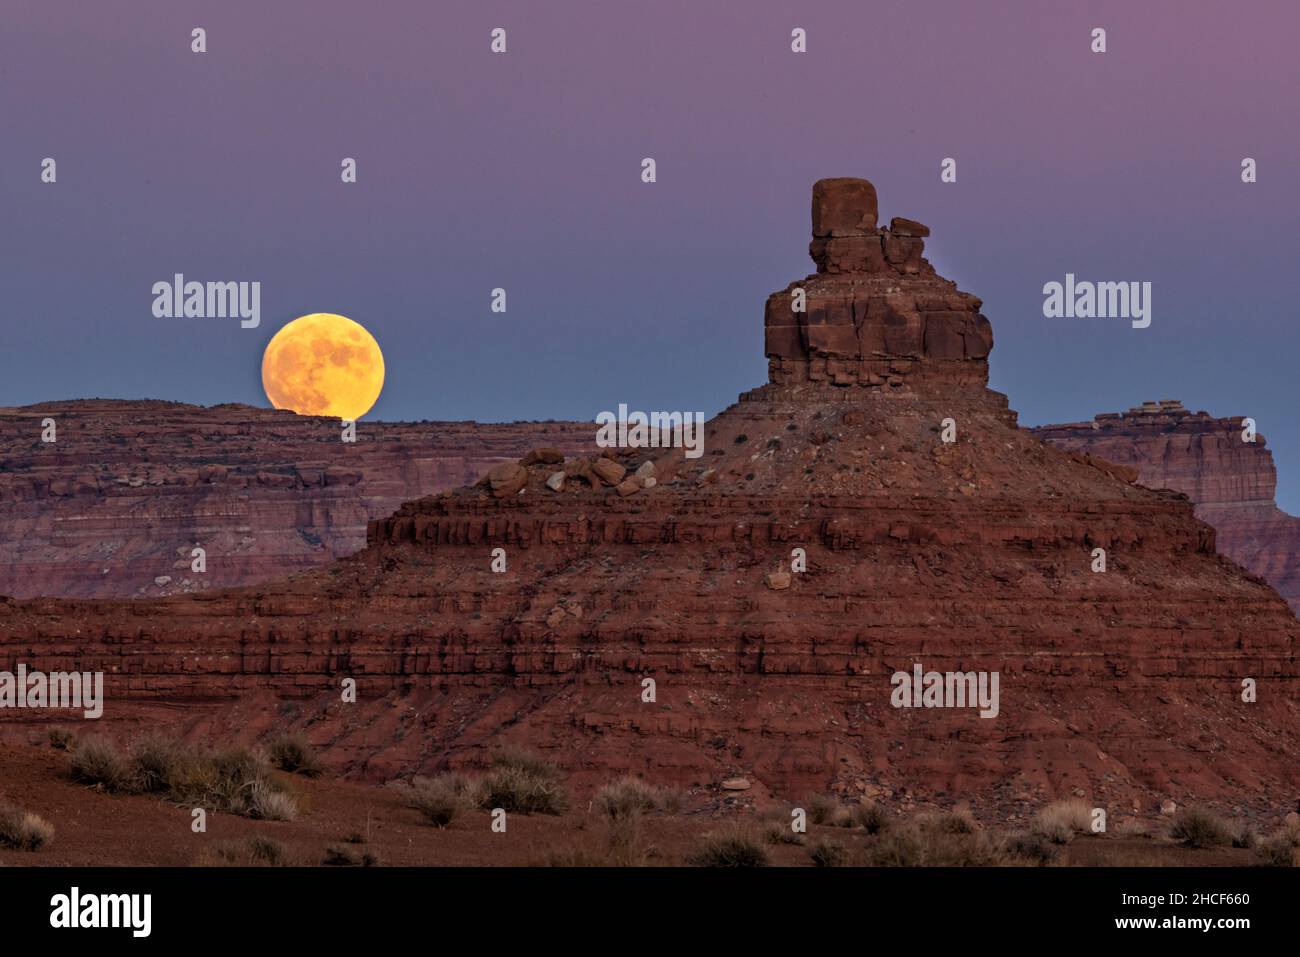 An October full moon rises over the buttes in Valley of the Gods, Bears Ears National Monument, Utah. Stock Photo